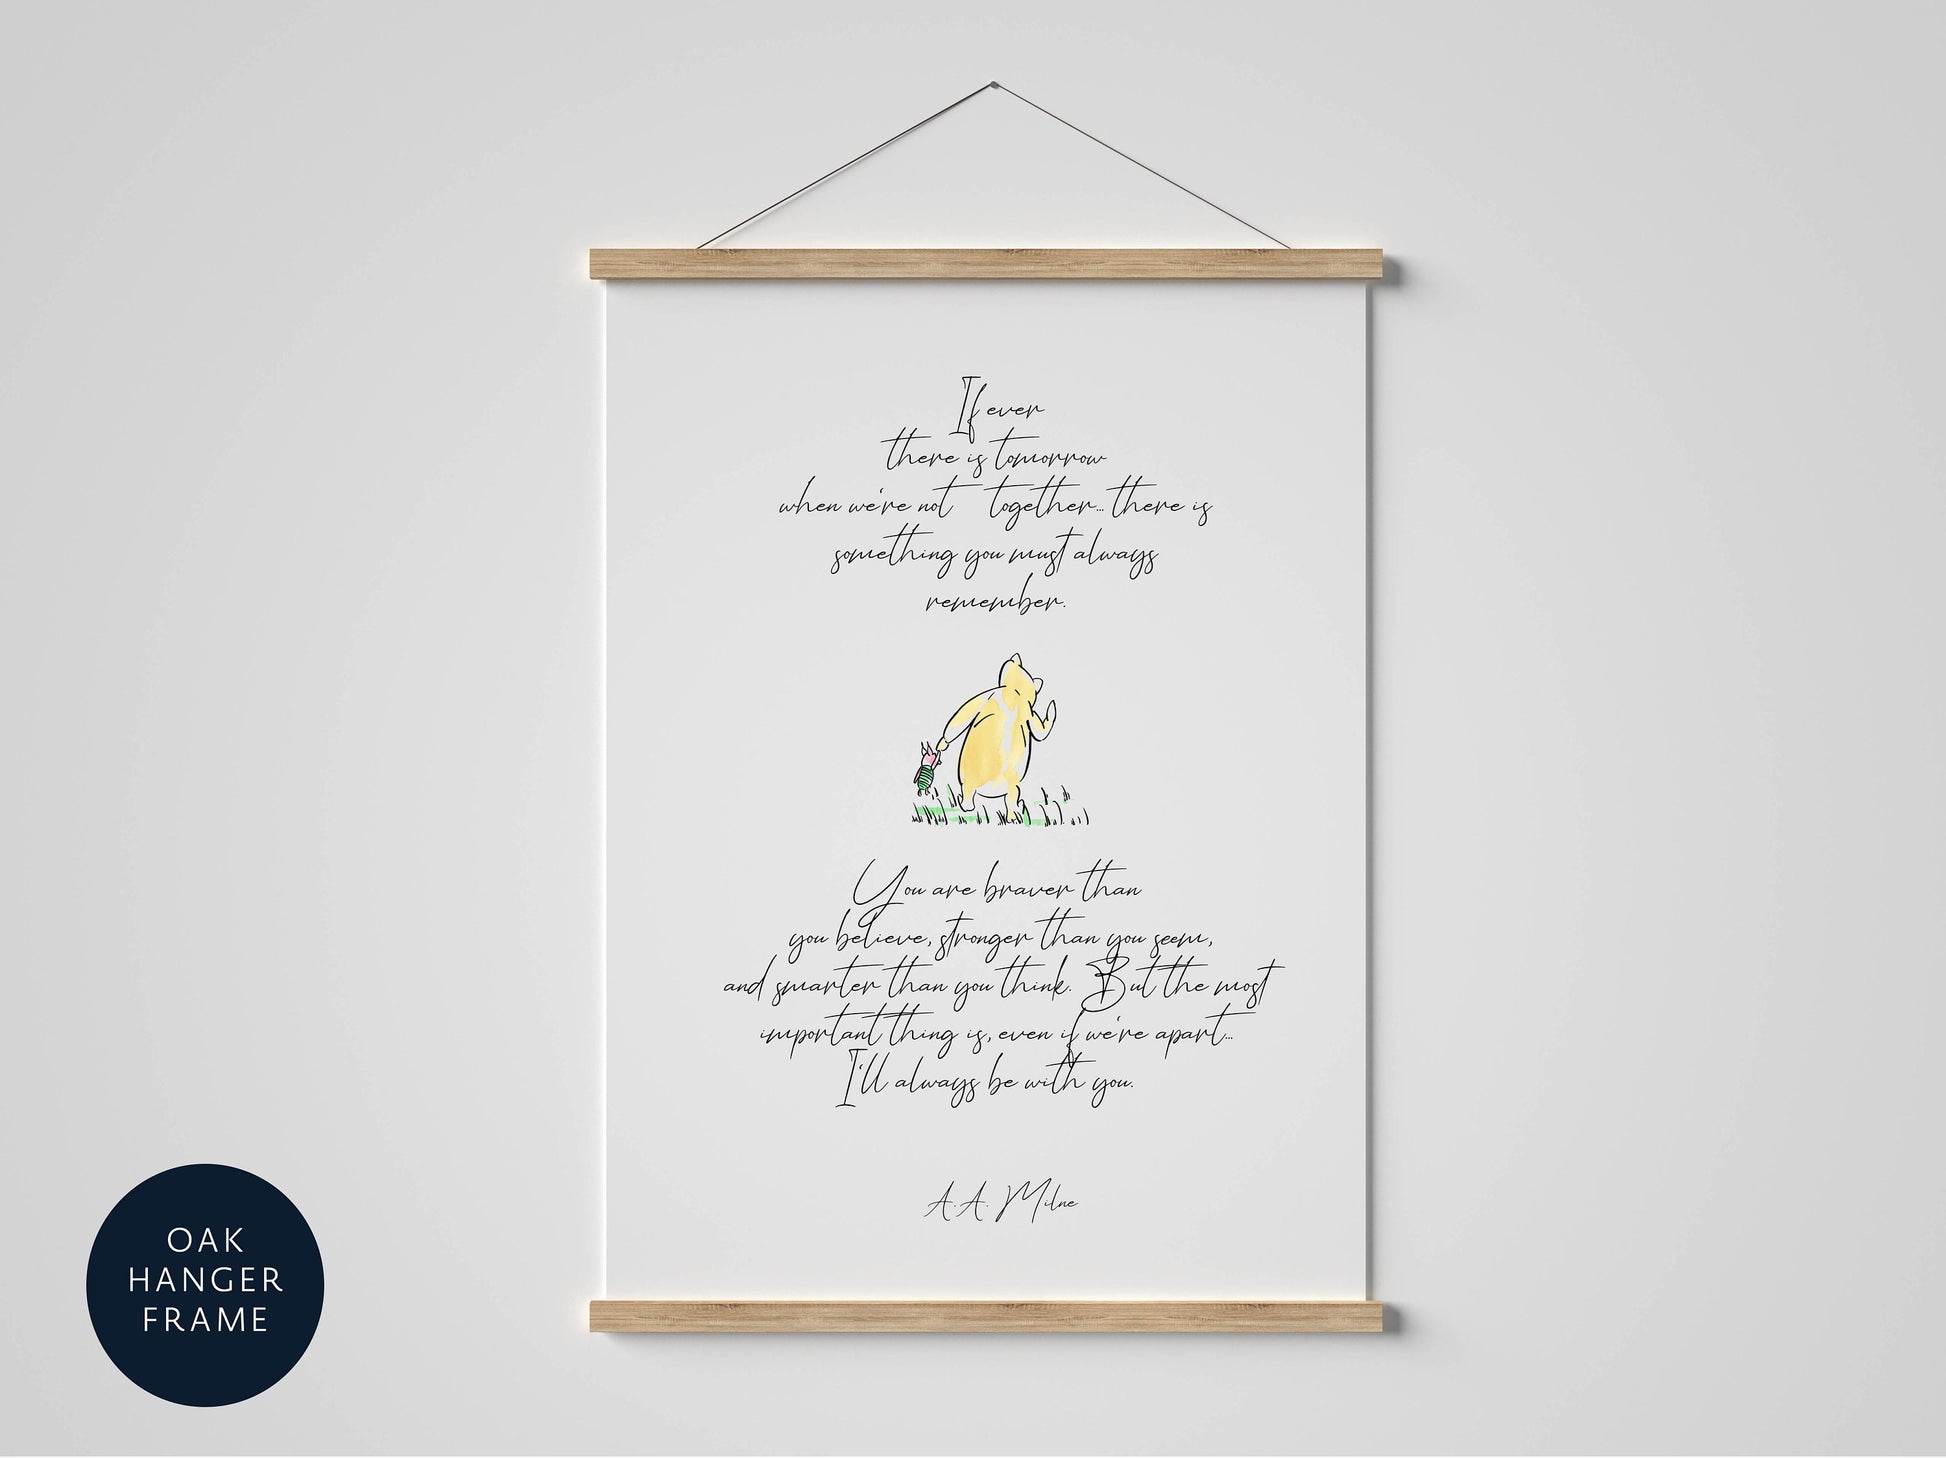 If ever there is tomorrow when we're not together, Pooh Bear quote framed print, vintage print, affirmation quote, retro poster